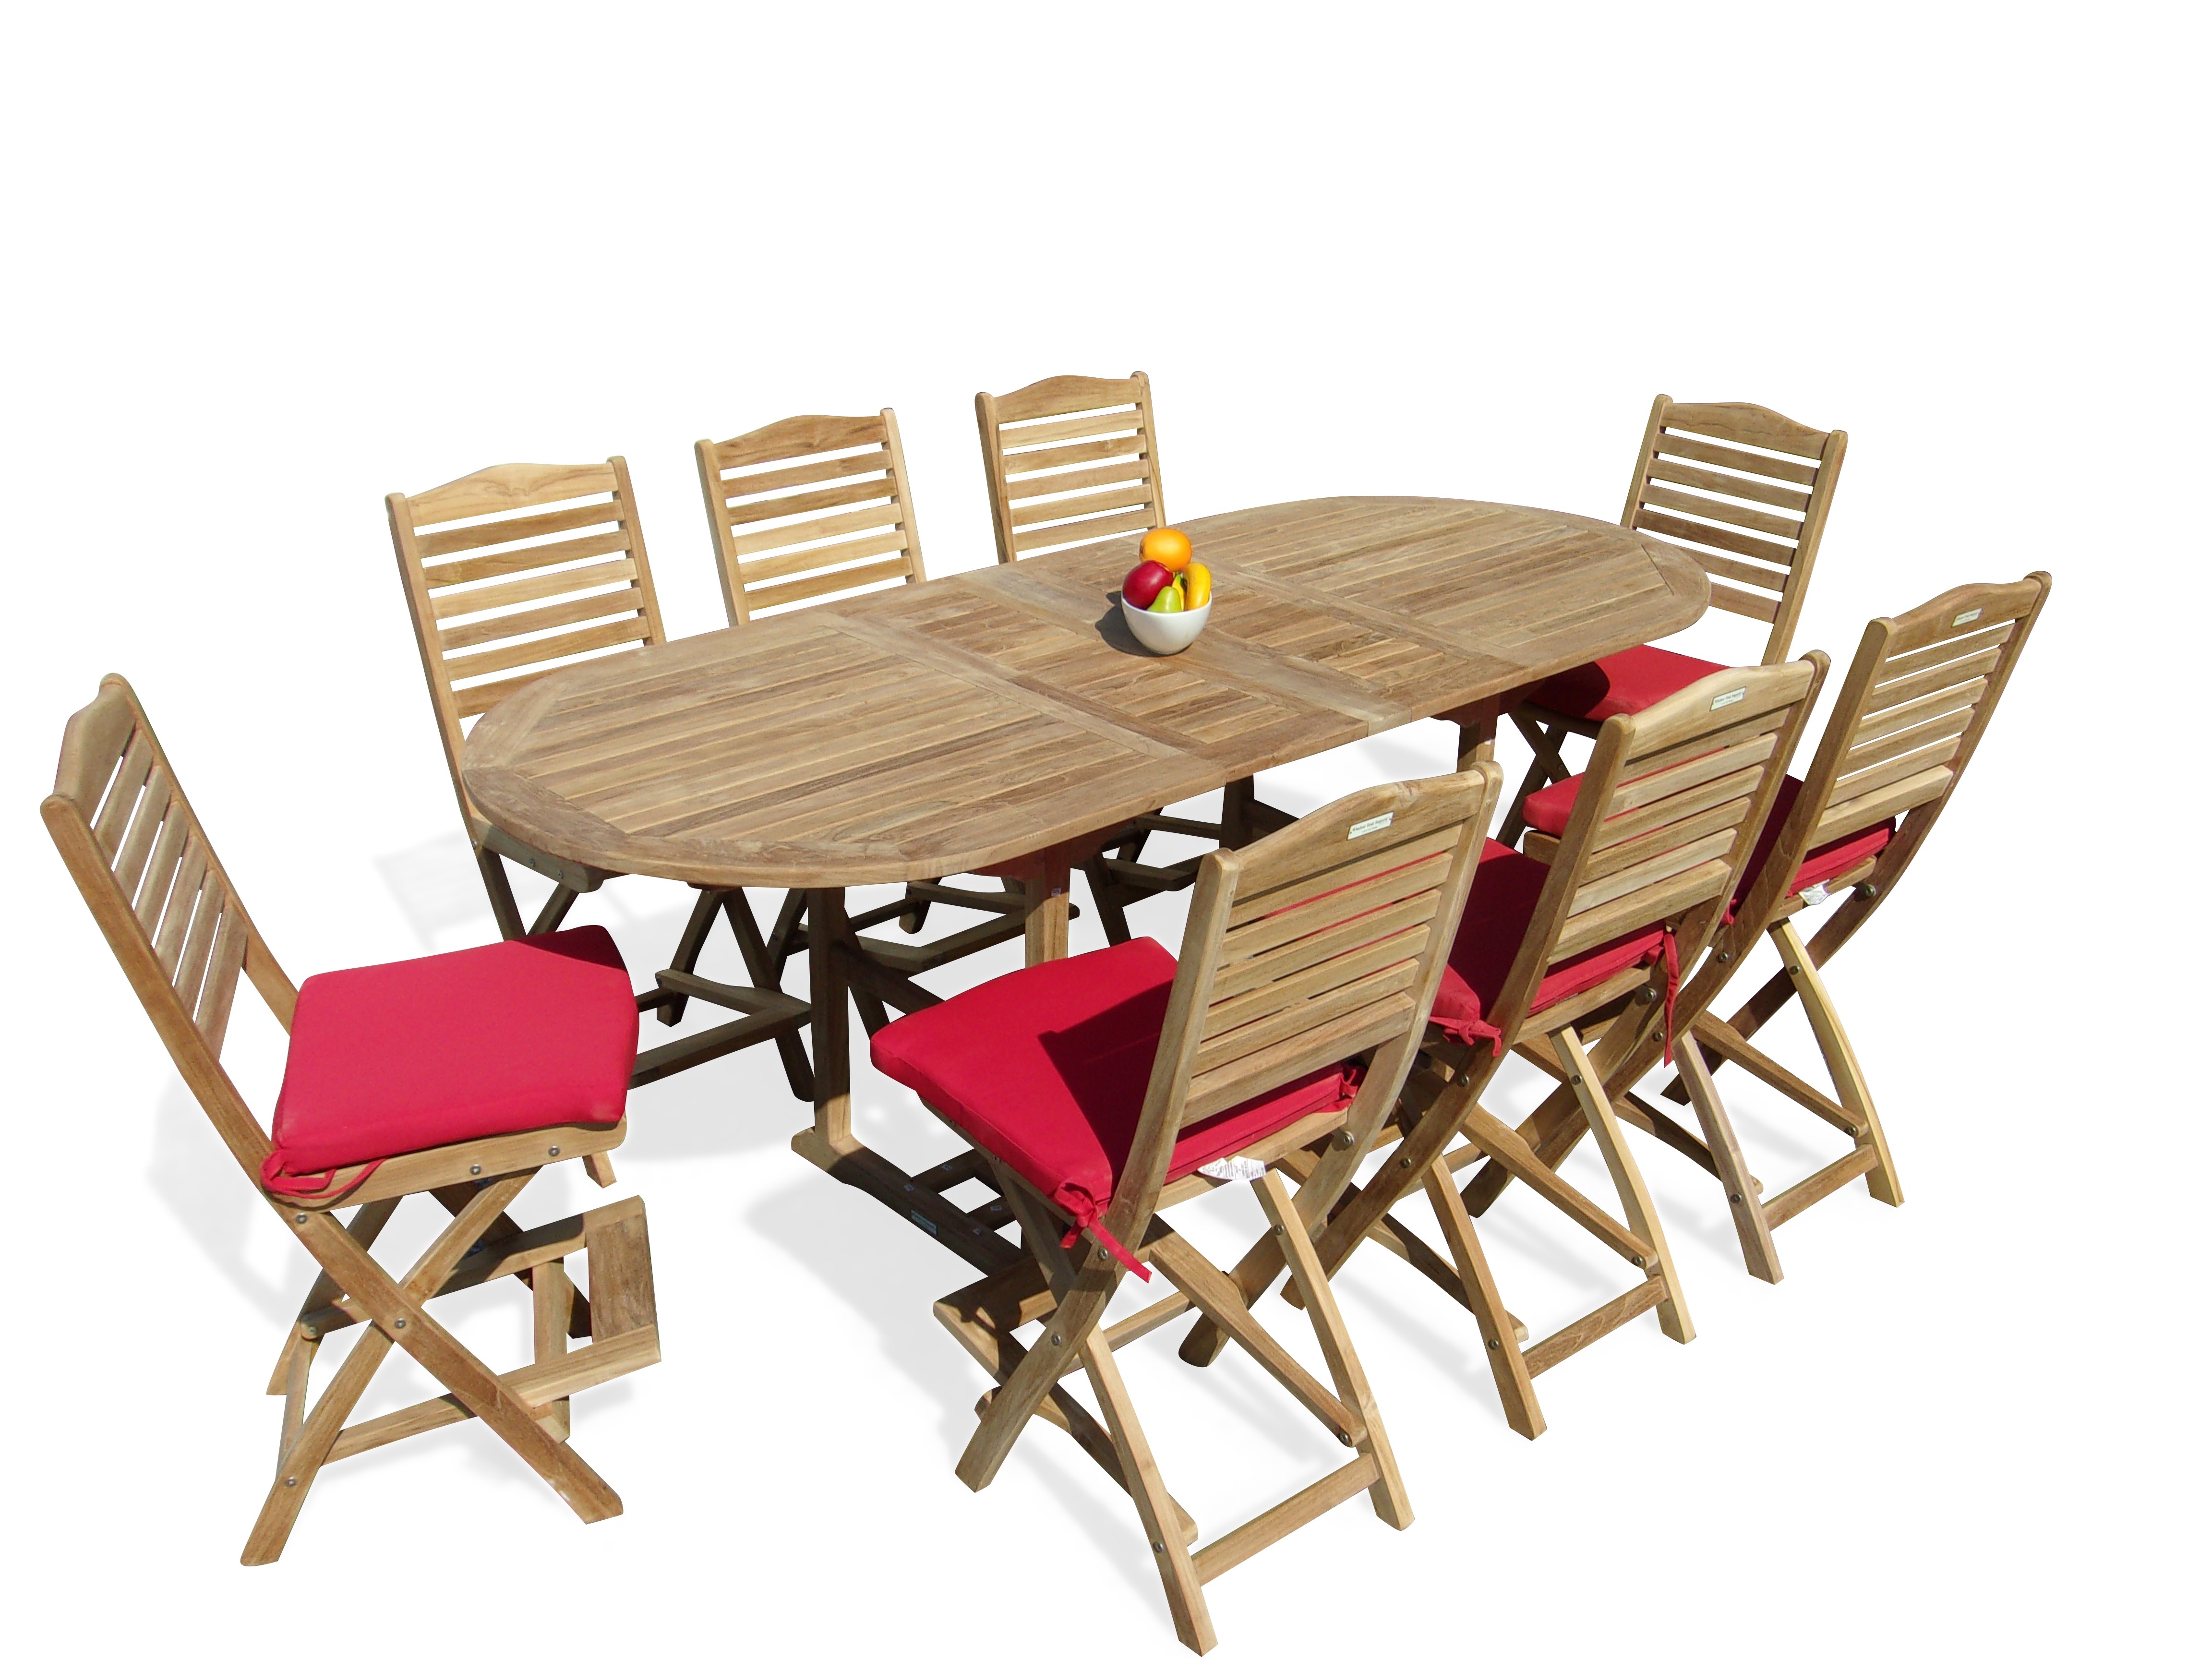 Bimini Counter Height 95" x 39" Double Leaf Oval Extension Table w 8 St. Barts Folding Chairs ..makes 3 Different Size Tables